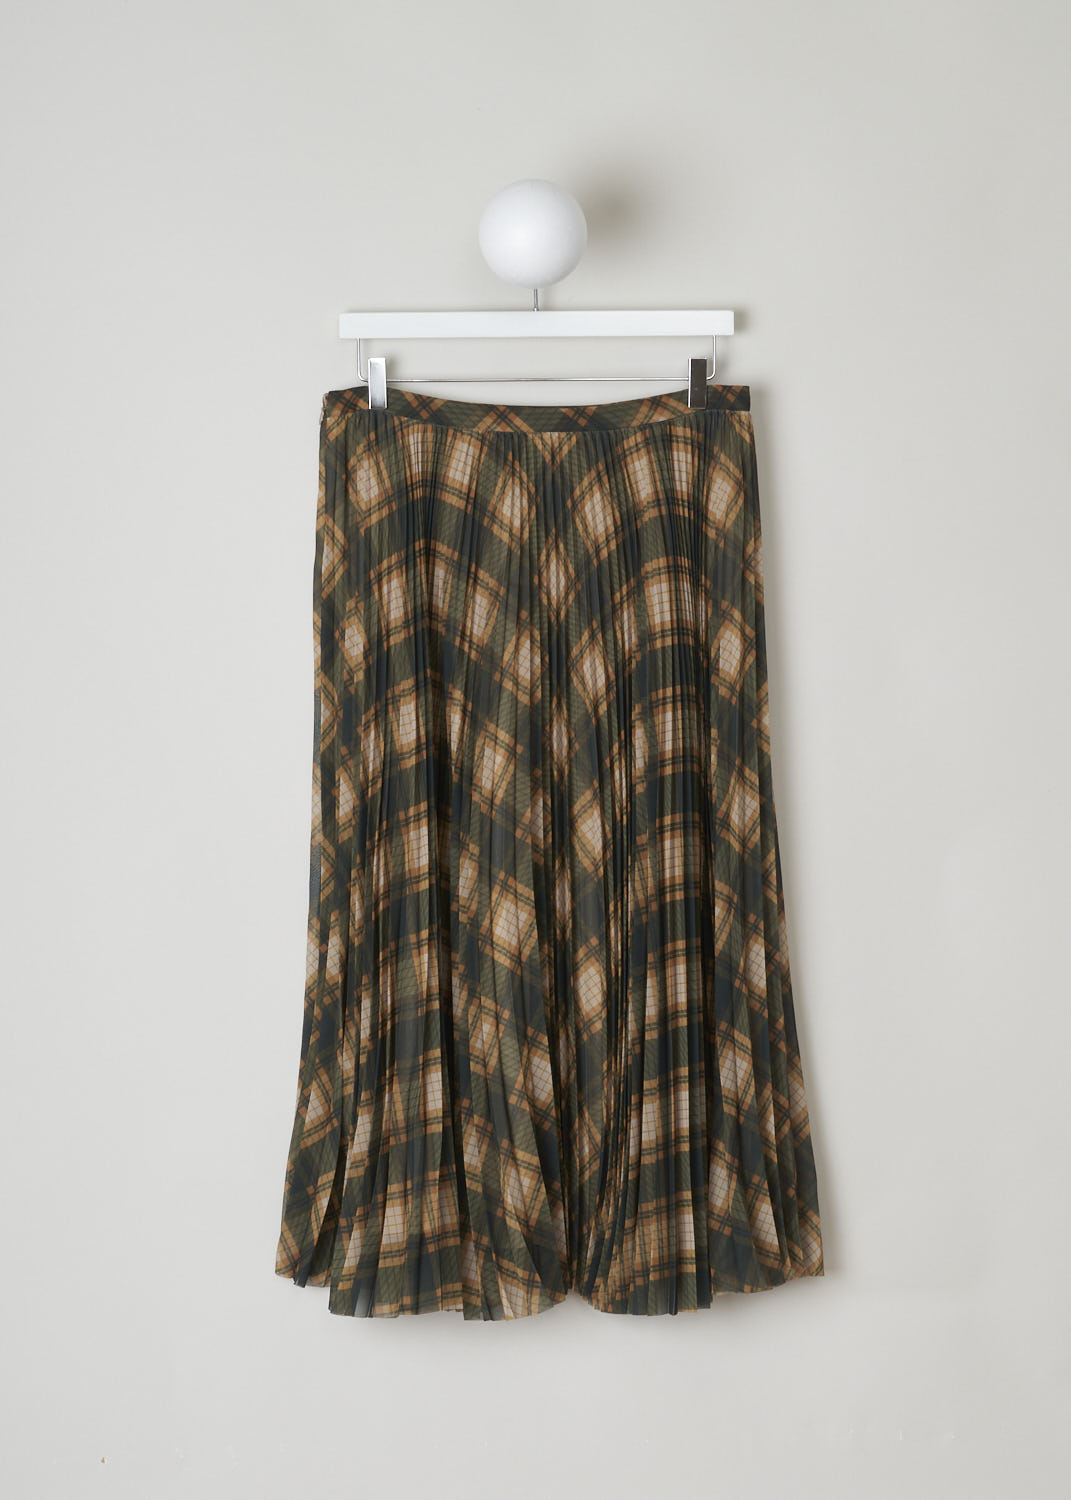 DRIES VAN NOTEN, GREEN AND ORANGE CHECKED PLEATED SKIRT, SAX_1228_WW_SKIRT_DESC, Print, Green, Back, This accordion pleated maxi skirt is made with an argyle pattern in green and orange tones. The skirt has a narrow waistband and a concealed side zipper. The skirt is fully lined